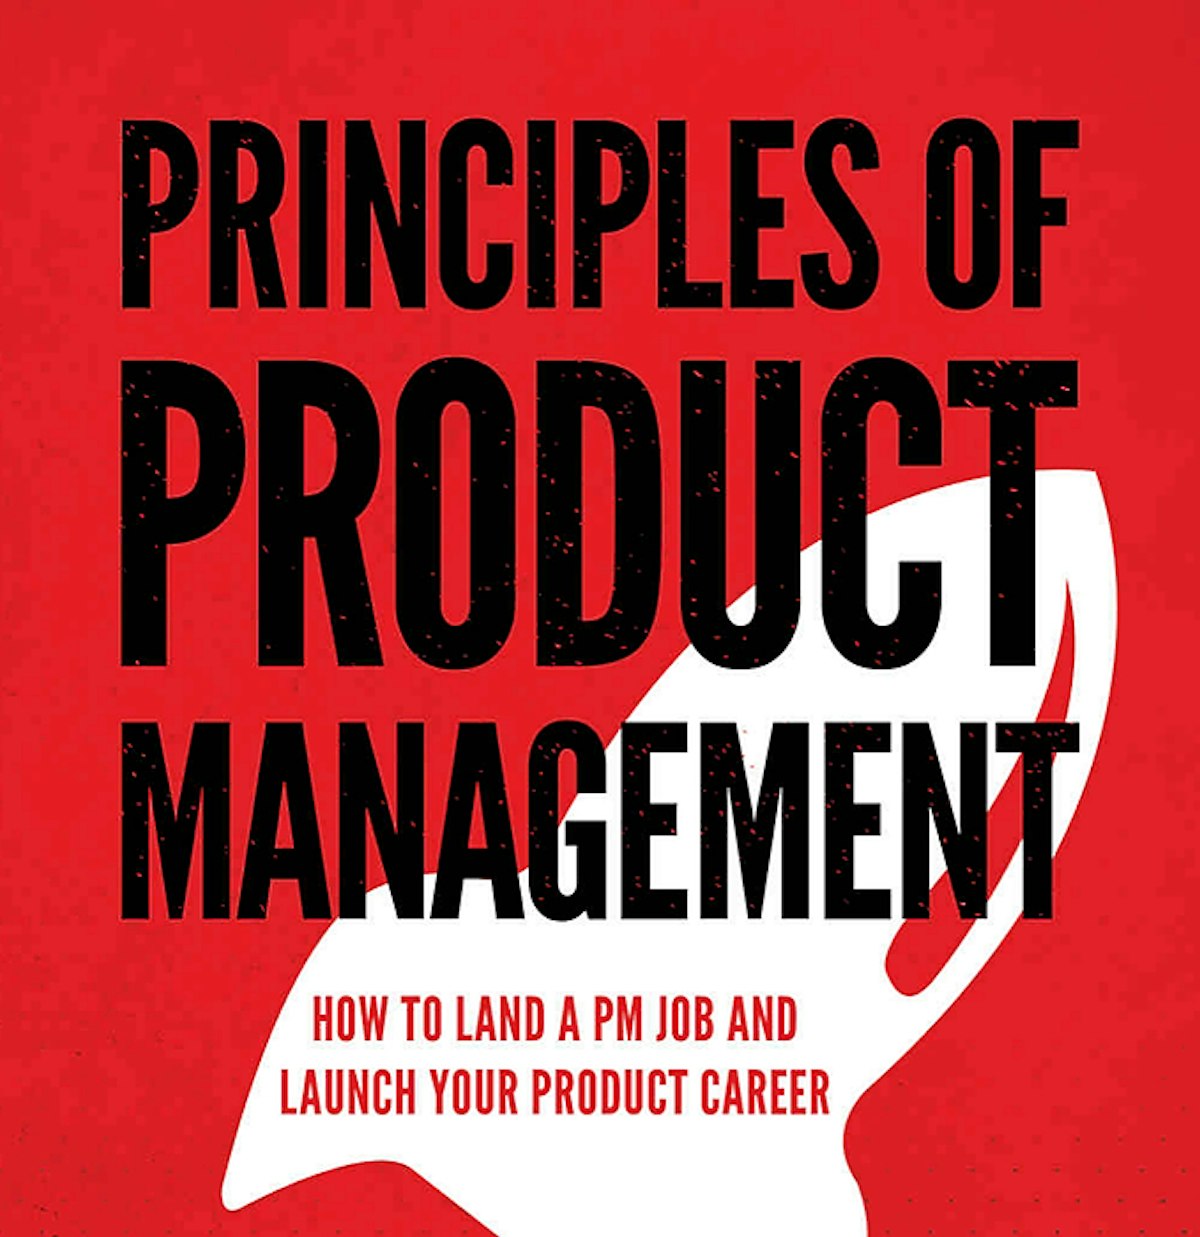 featured image - Principles of Product Management [NEW BOOK]